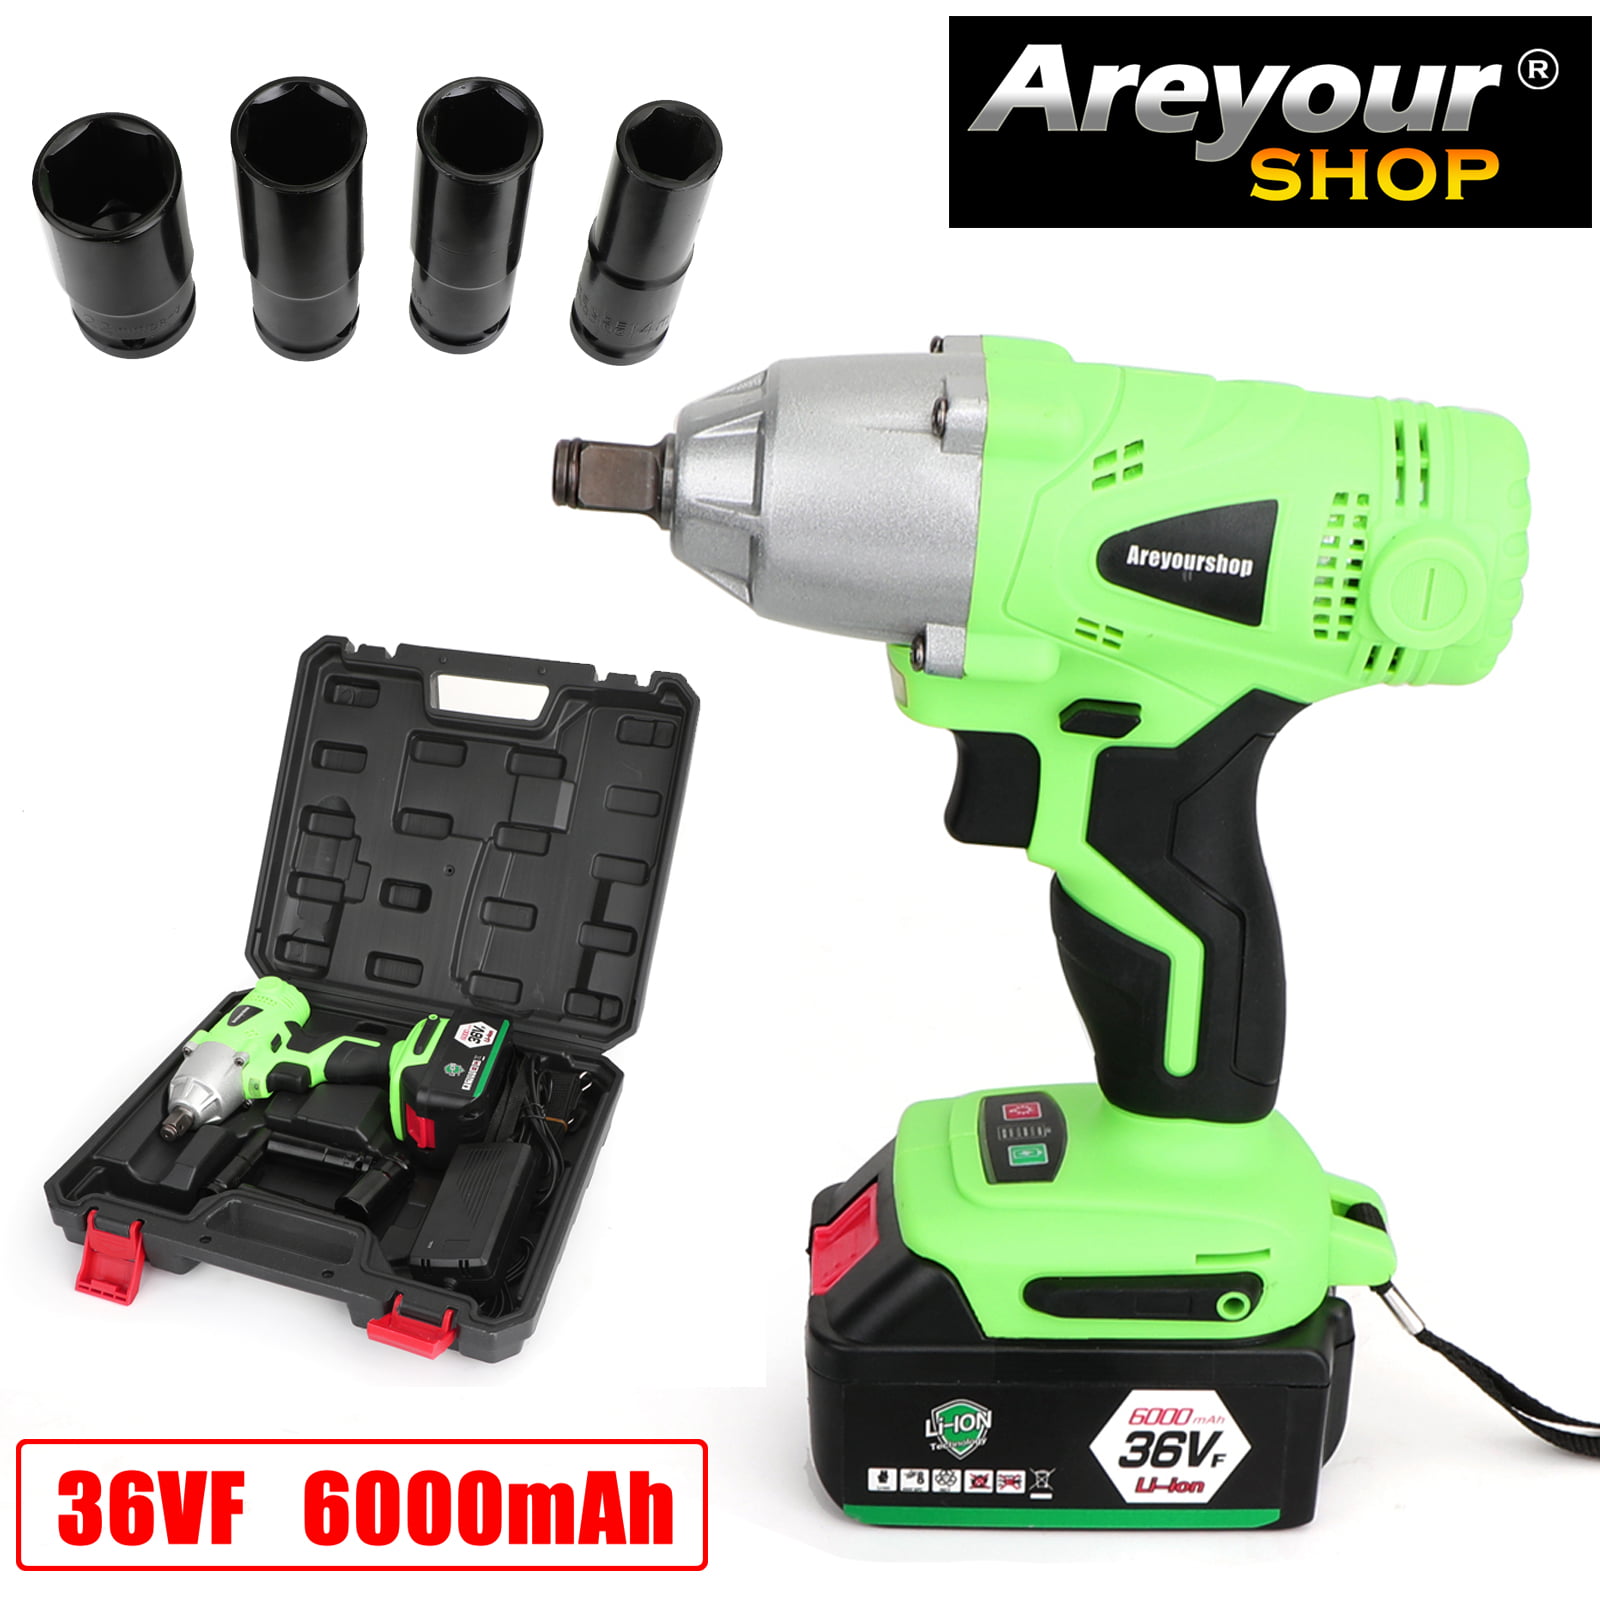 350Nm Impact Wrench Powerful Combo Tool 128VF & Rechargeable Li-Ion Battery 